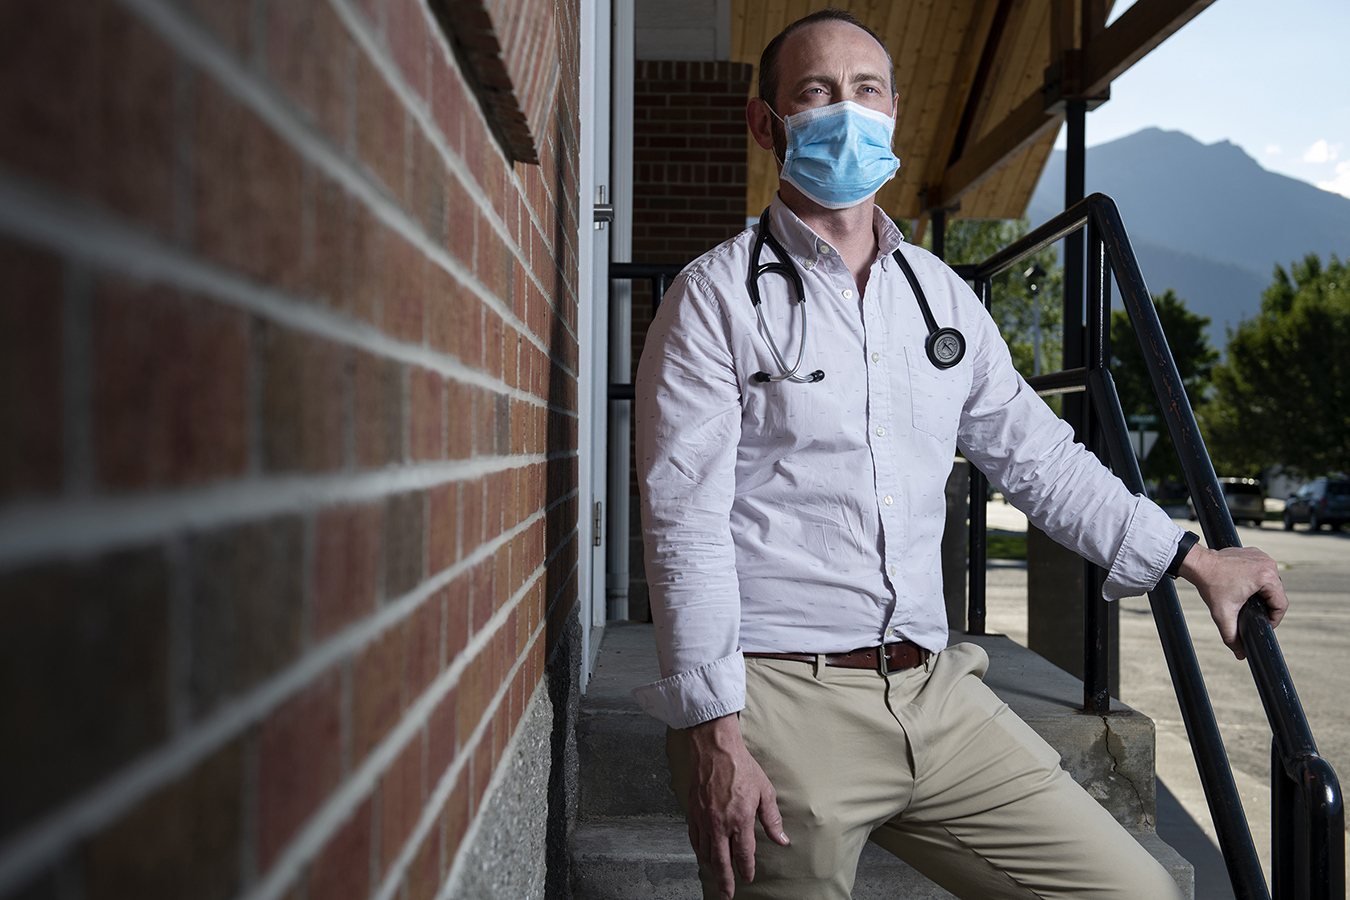 Primary Care Doctors Look at Payment Overhaul After Pandemic Disruption